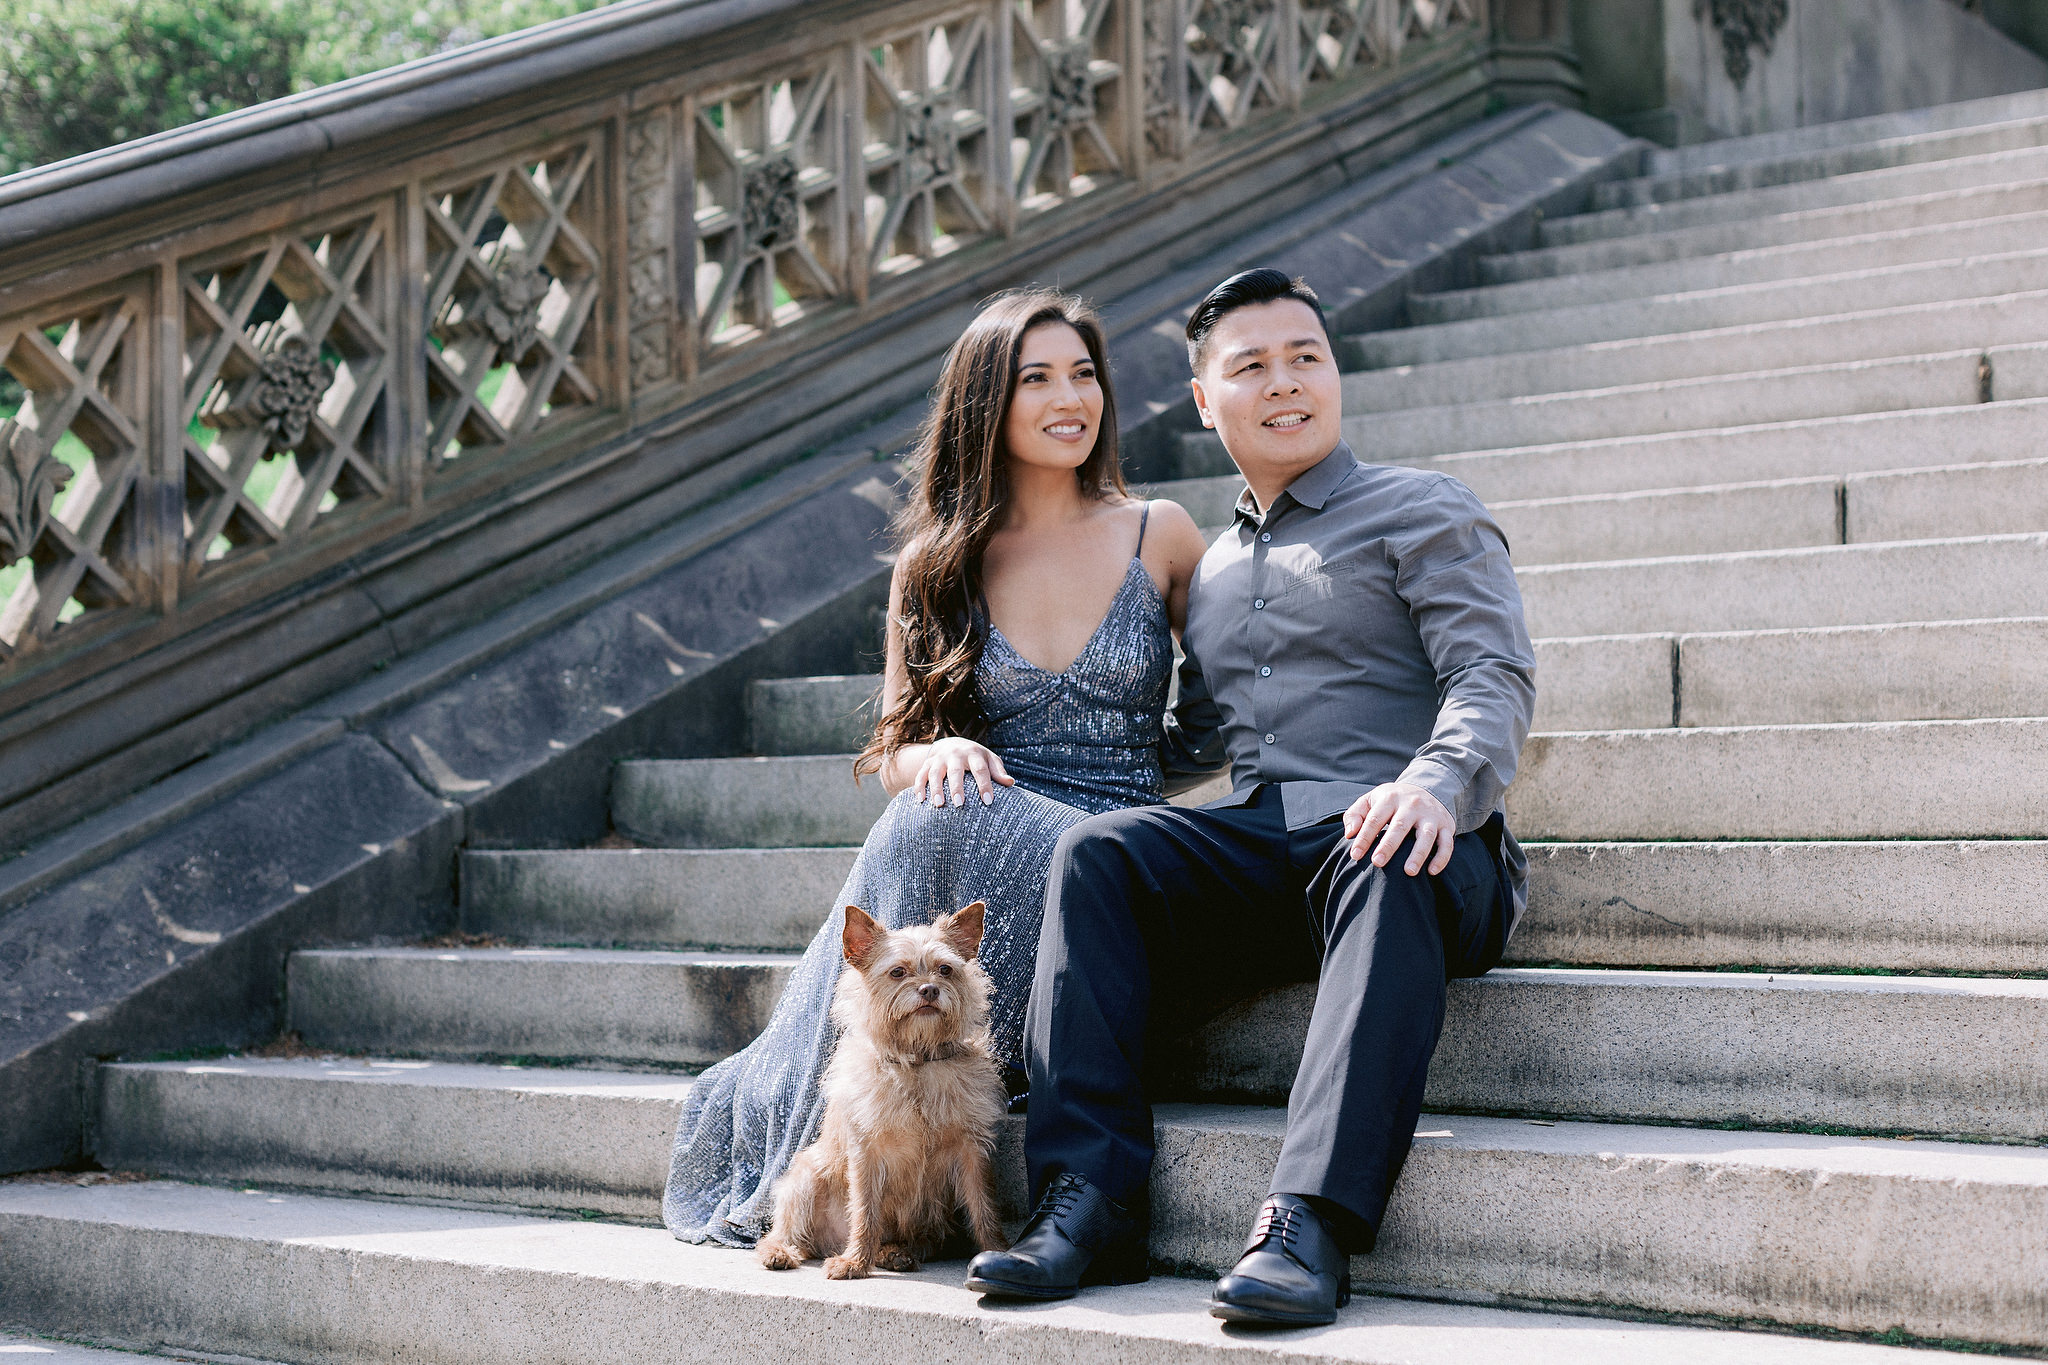 The engaged couple is at NY Central Park with their pet. Engagement session with pets photo by Jenny Fu Studio.